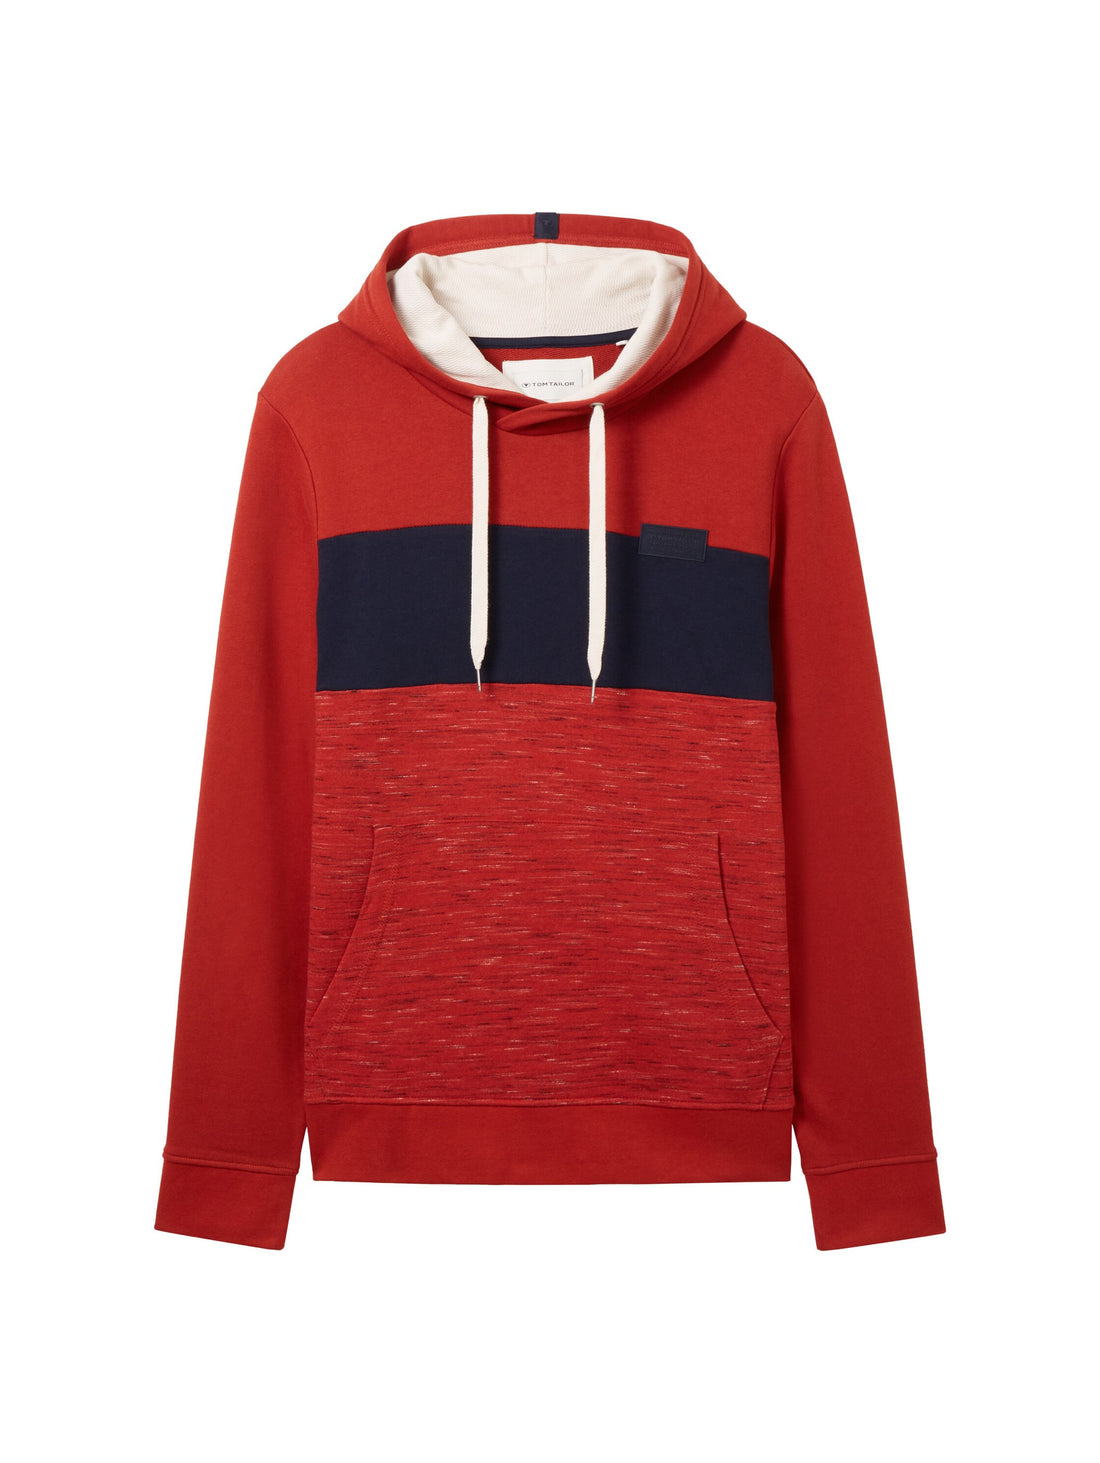 Hoodie With Color Block Design_1037834_32436_01